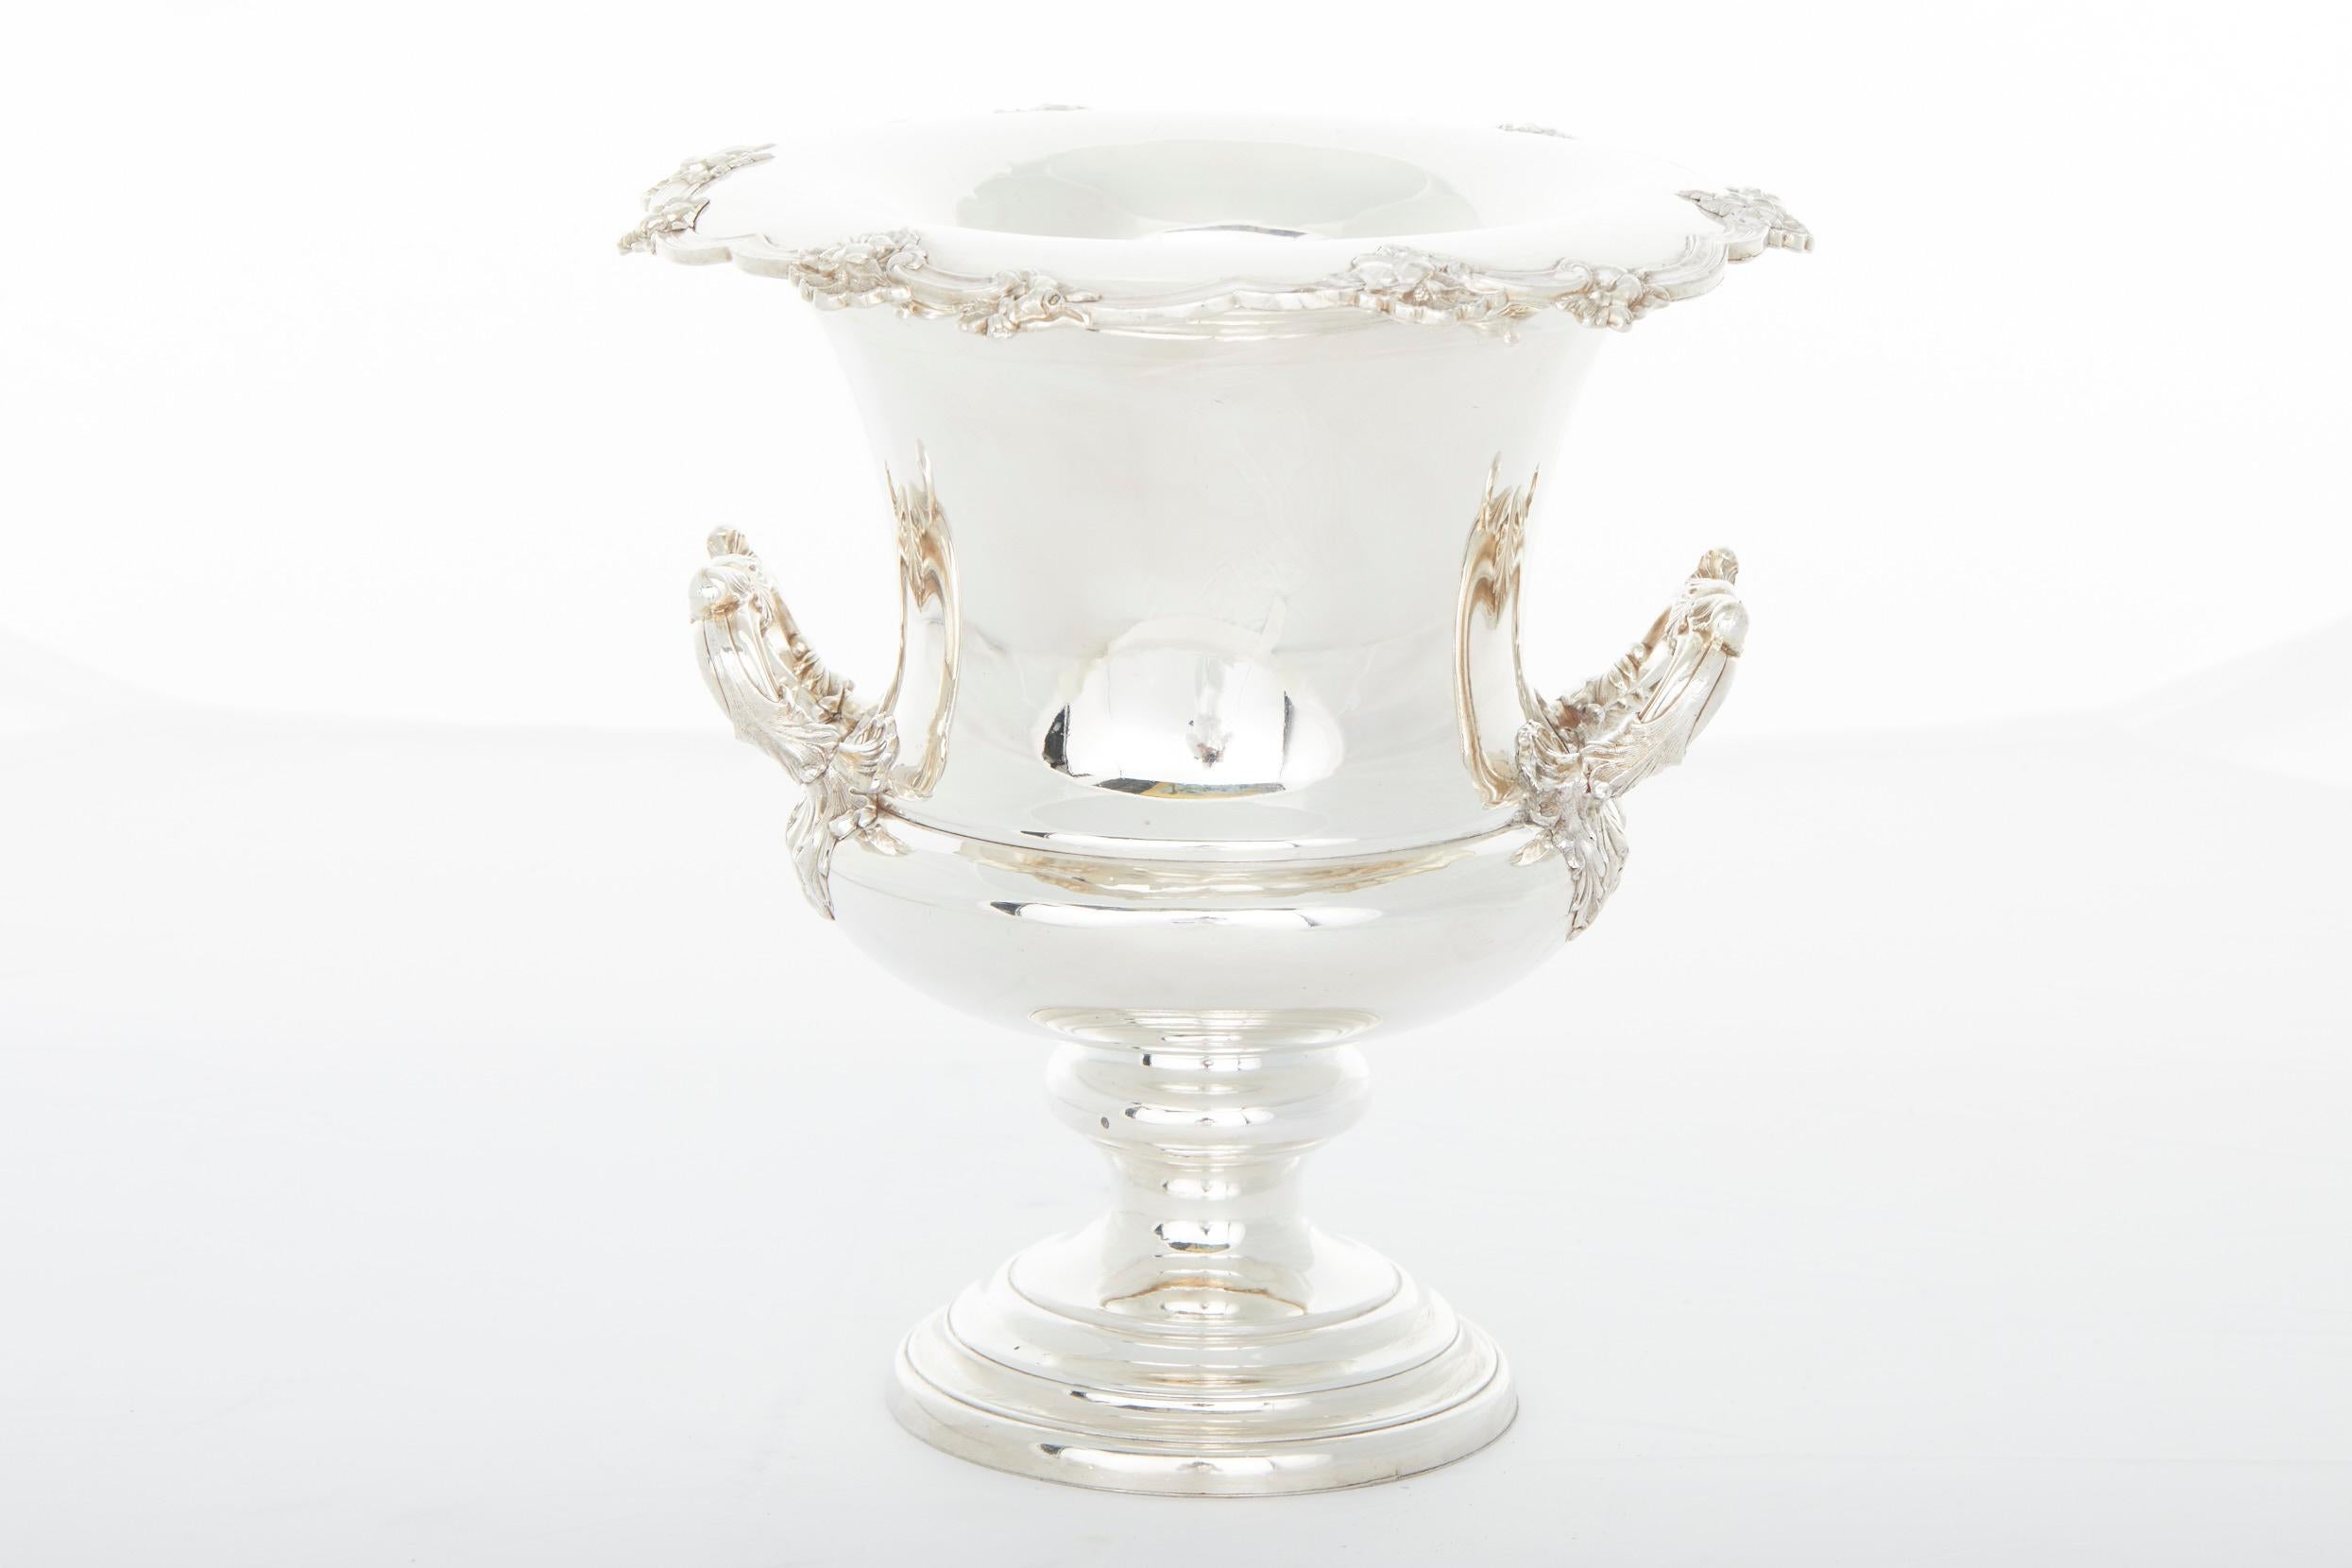 Mid 19th century English Sheffield silver plated barware / tableware wine cooler / ice bucket with removable insert, exterior design details and two side handles. The wine cooler / ice bucket is in good antique condition with wear consistent with